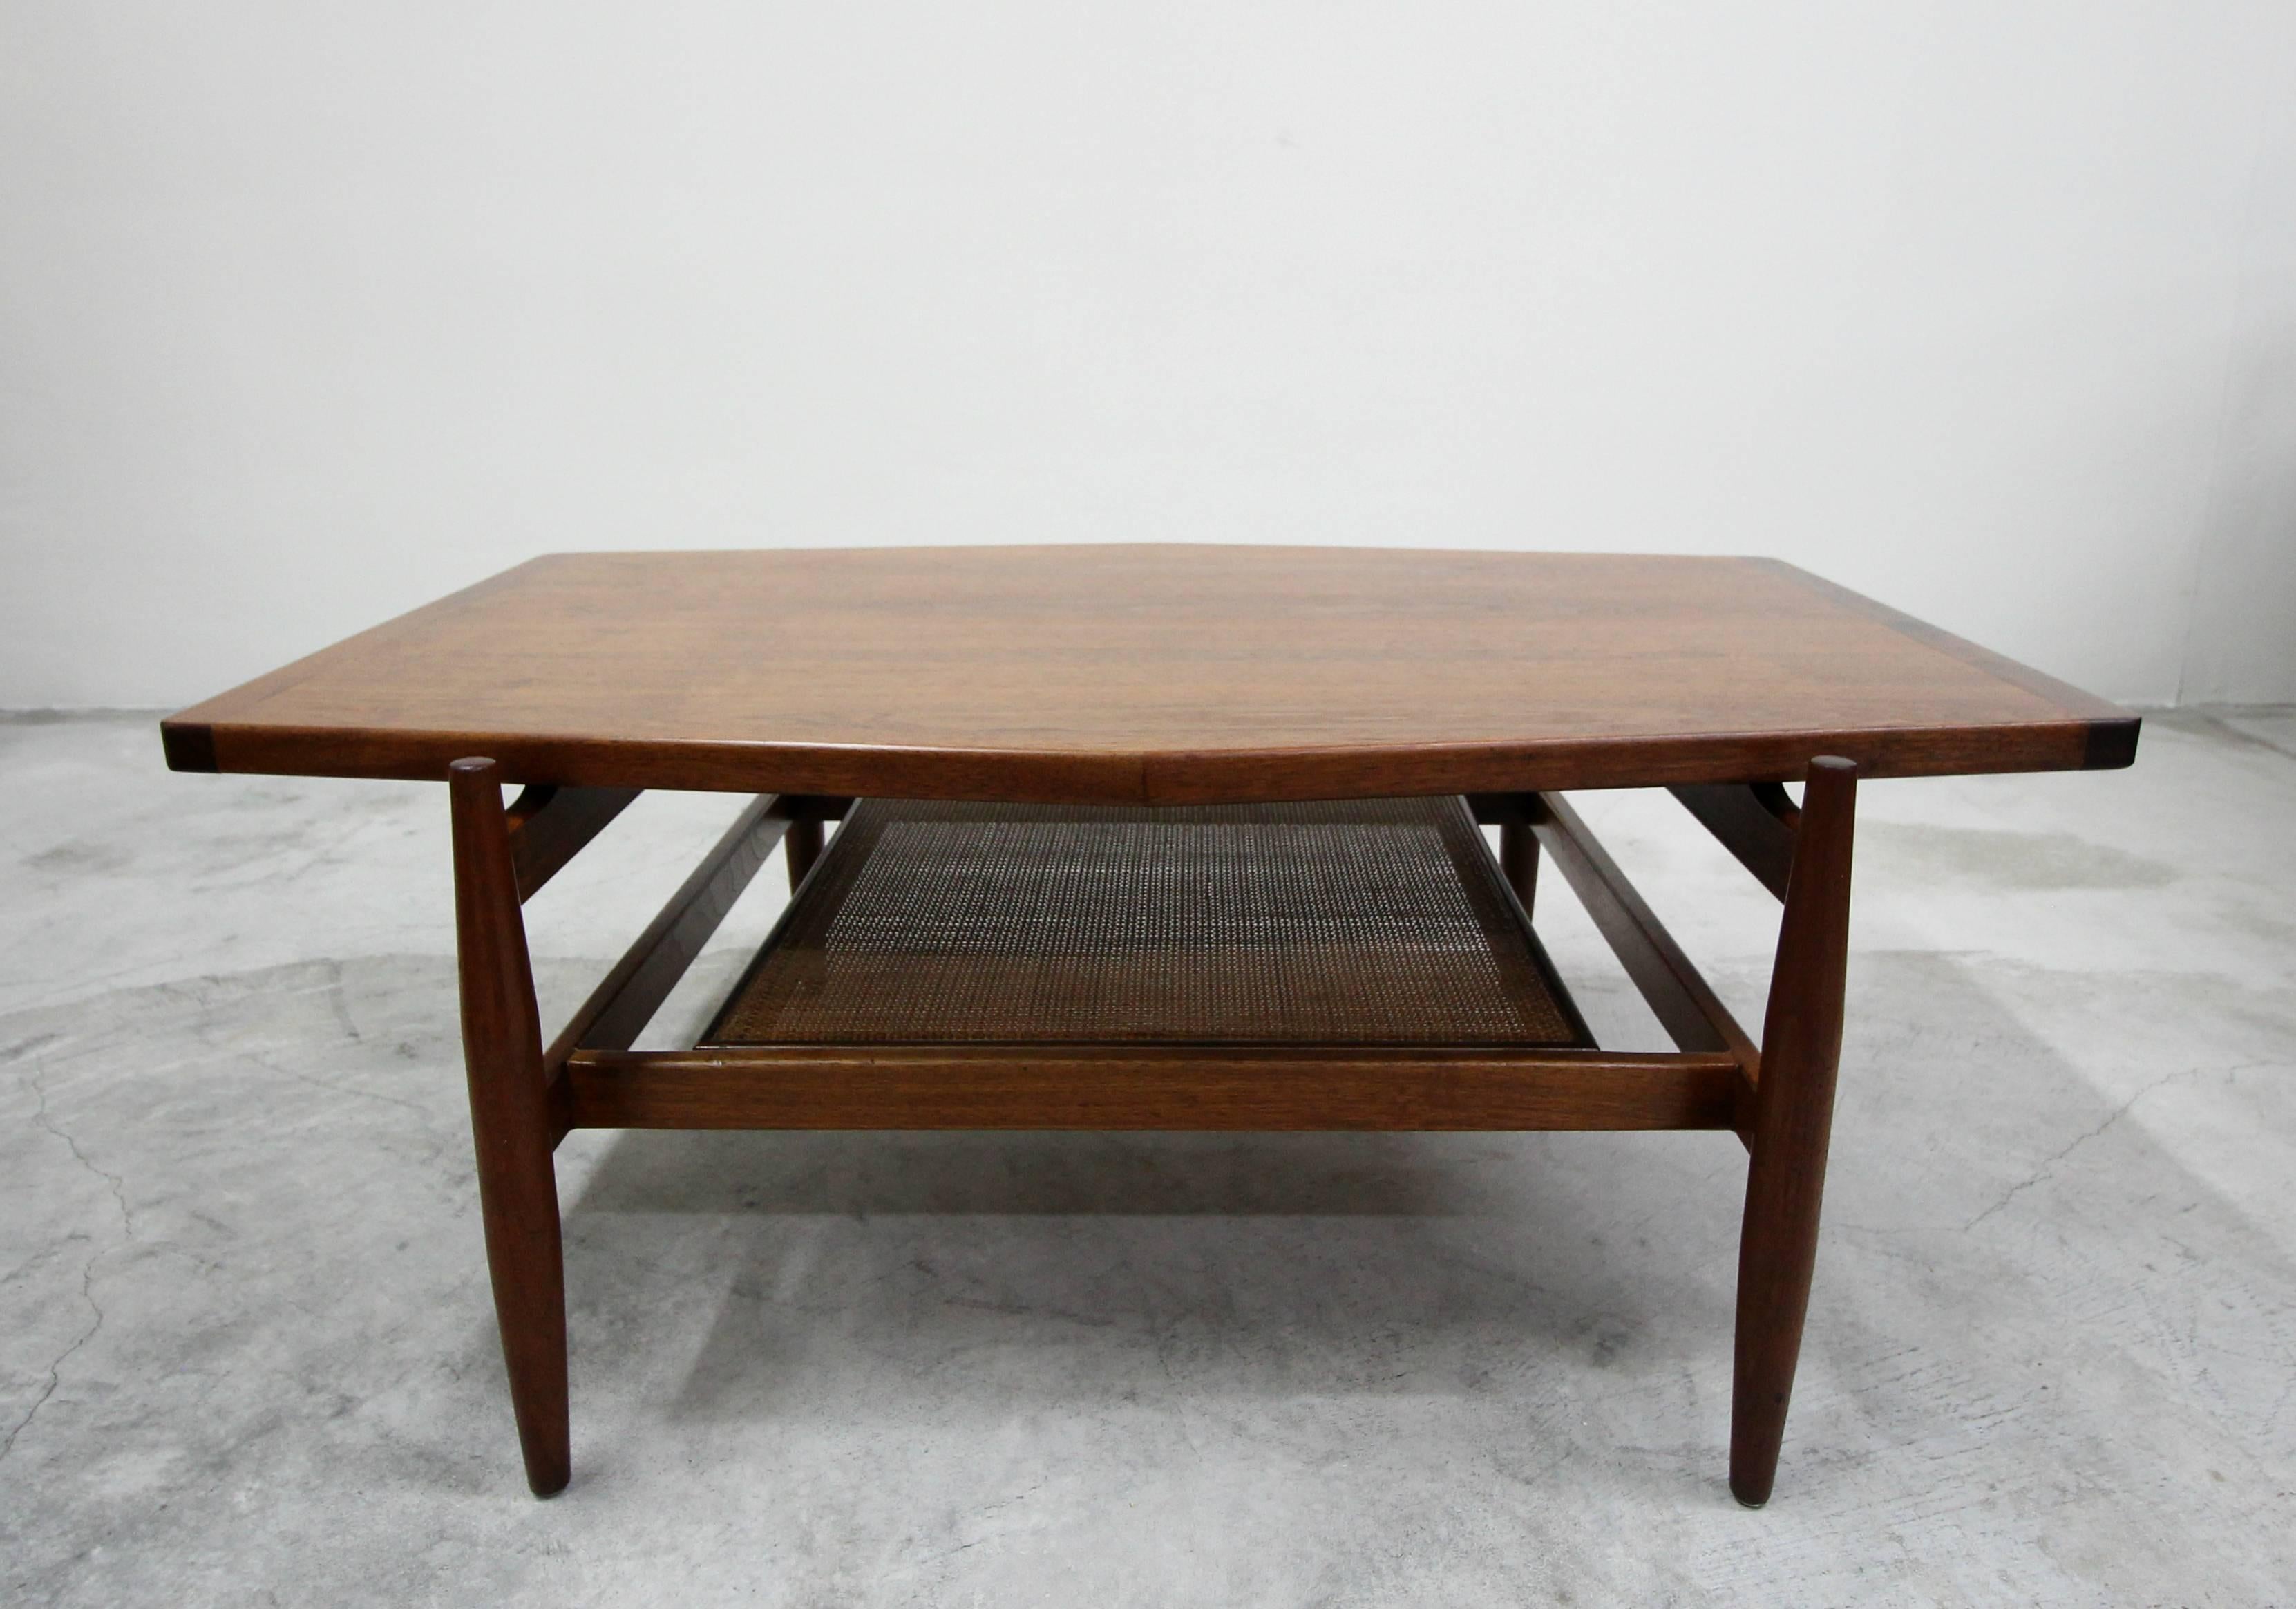 20th Century Midcentury Walnut and Cane Coffee Table by Jens Risom